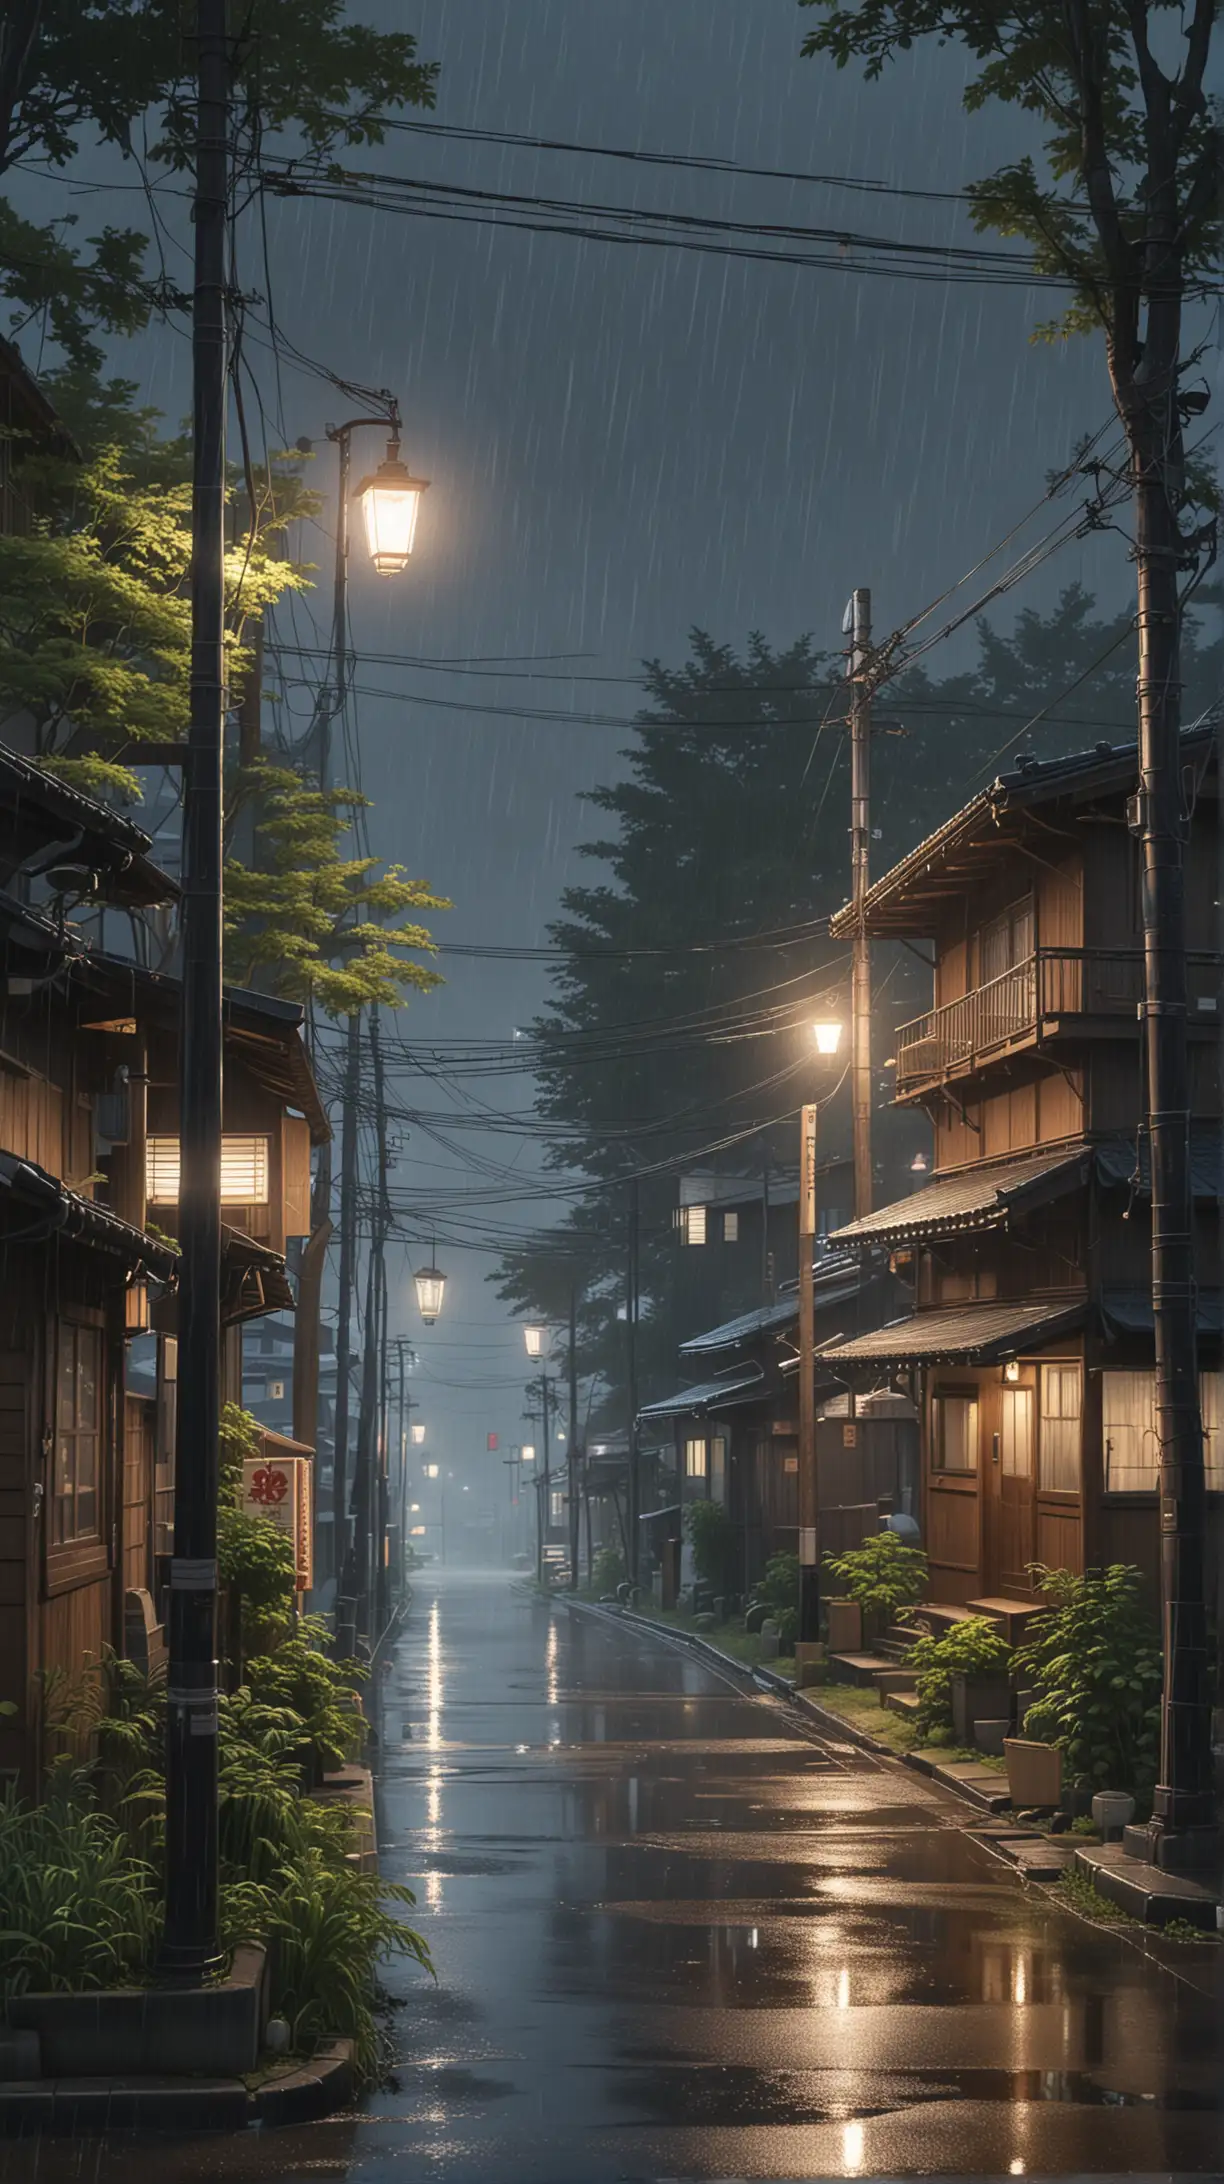 Rainy Night in a Japanese Village GhibliInspired Anime Scene with Detailed Acrylic Palette Colors